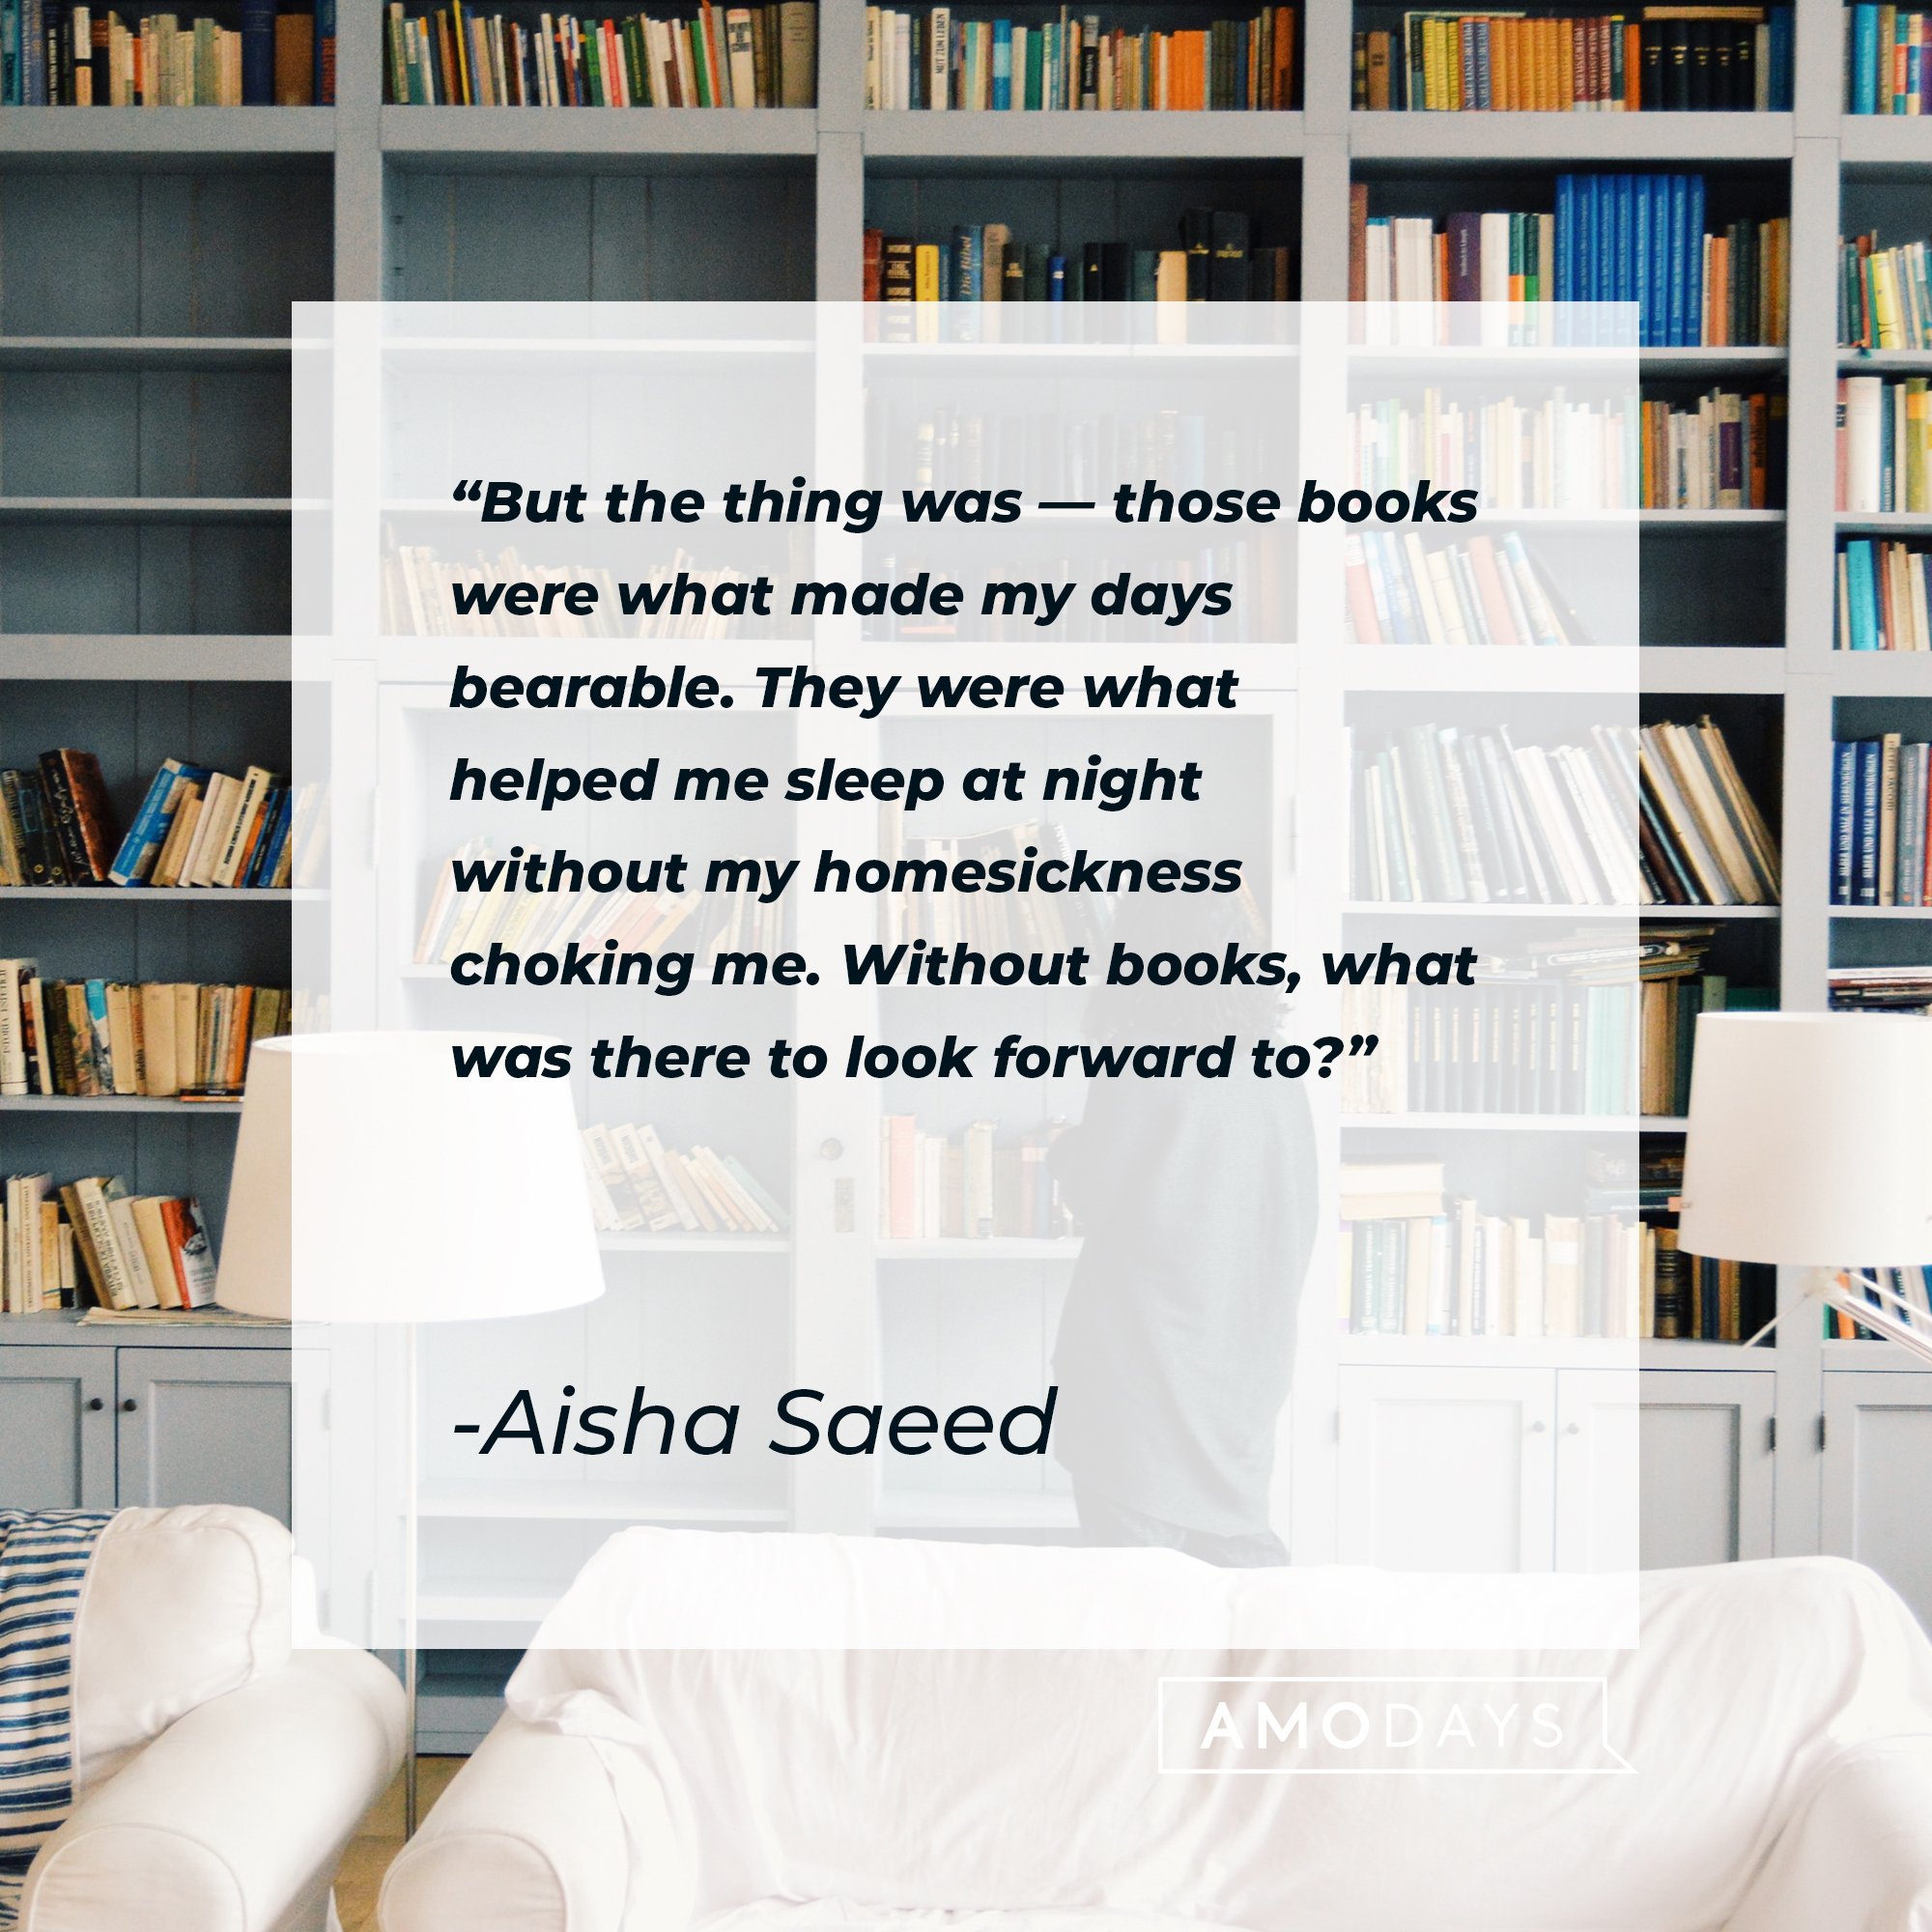 Aisha Saeed's quote: "But the thing was — those books were what made my days bearable. They were what helped me sleep at night without my homesickness choking me. Without books, what was there to look forward to?" | Image: AmoDays